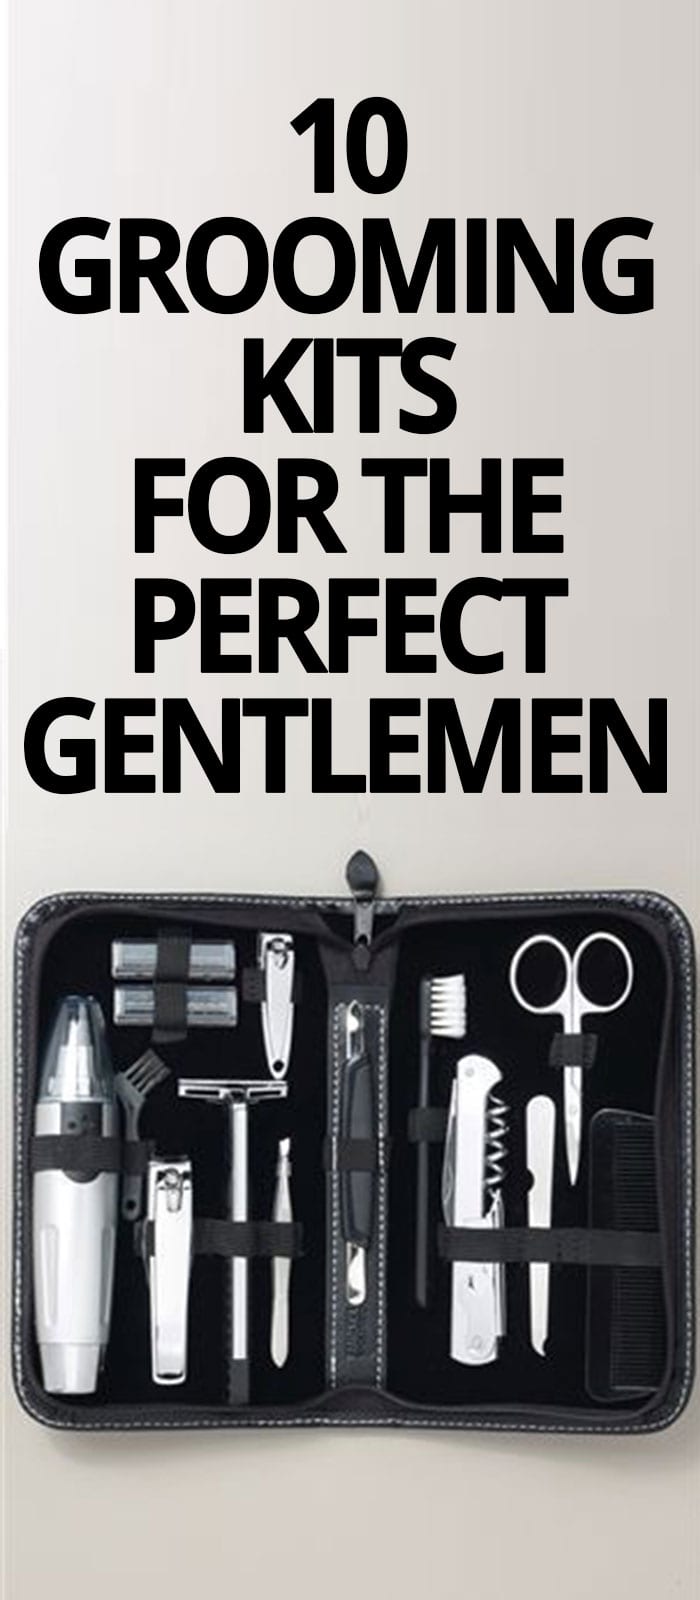 GROOMING-KITS-FOR-THE-PERFECT-GENTLEMEN